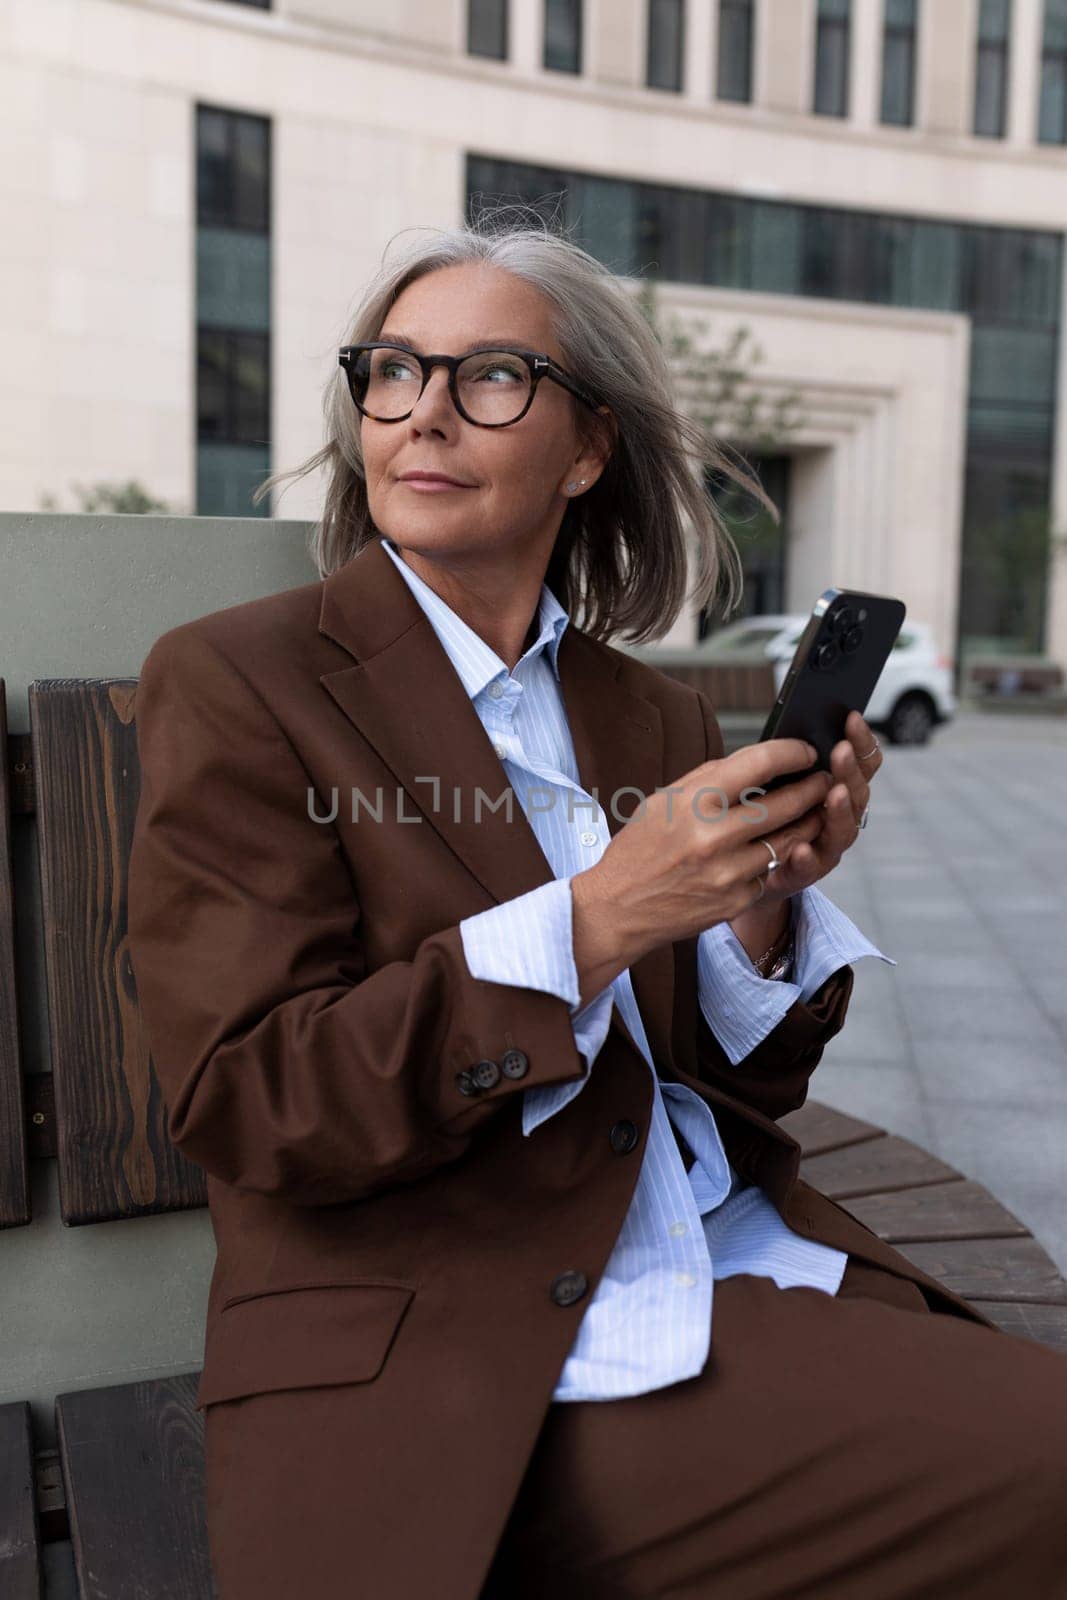 portrait of a well-groomed charming entrepreneur woman of mature years in a brown suit.